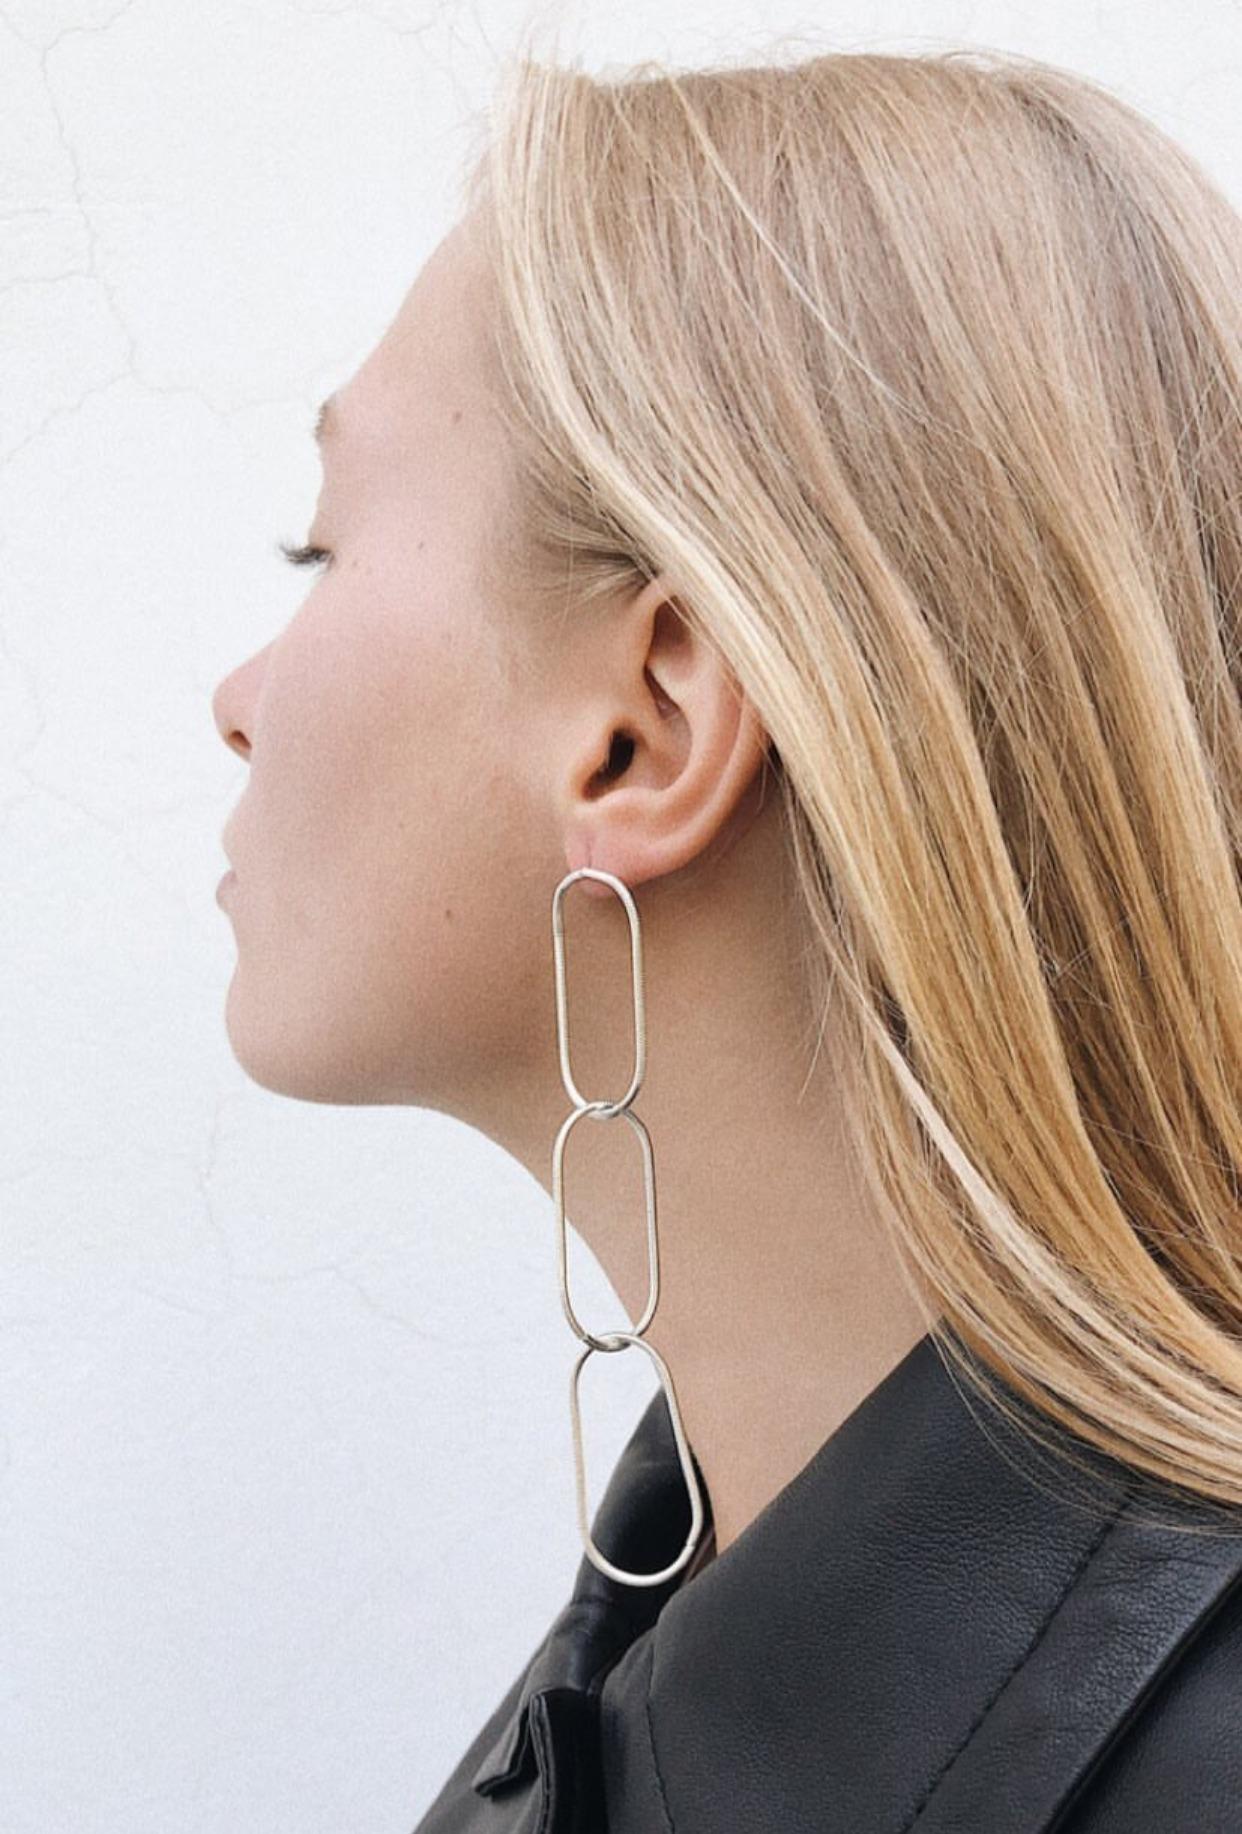 Triple halo earrings 

If you want to make a statement these sterling silver earrings will do the job. Our triple halo earrings offer a modern and minimal look for all ages and occasions. 

All of our earrings have 10 K posts to avoid allergies and